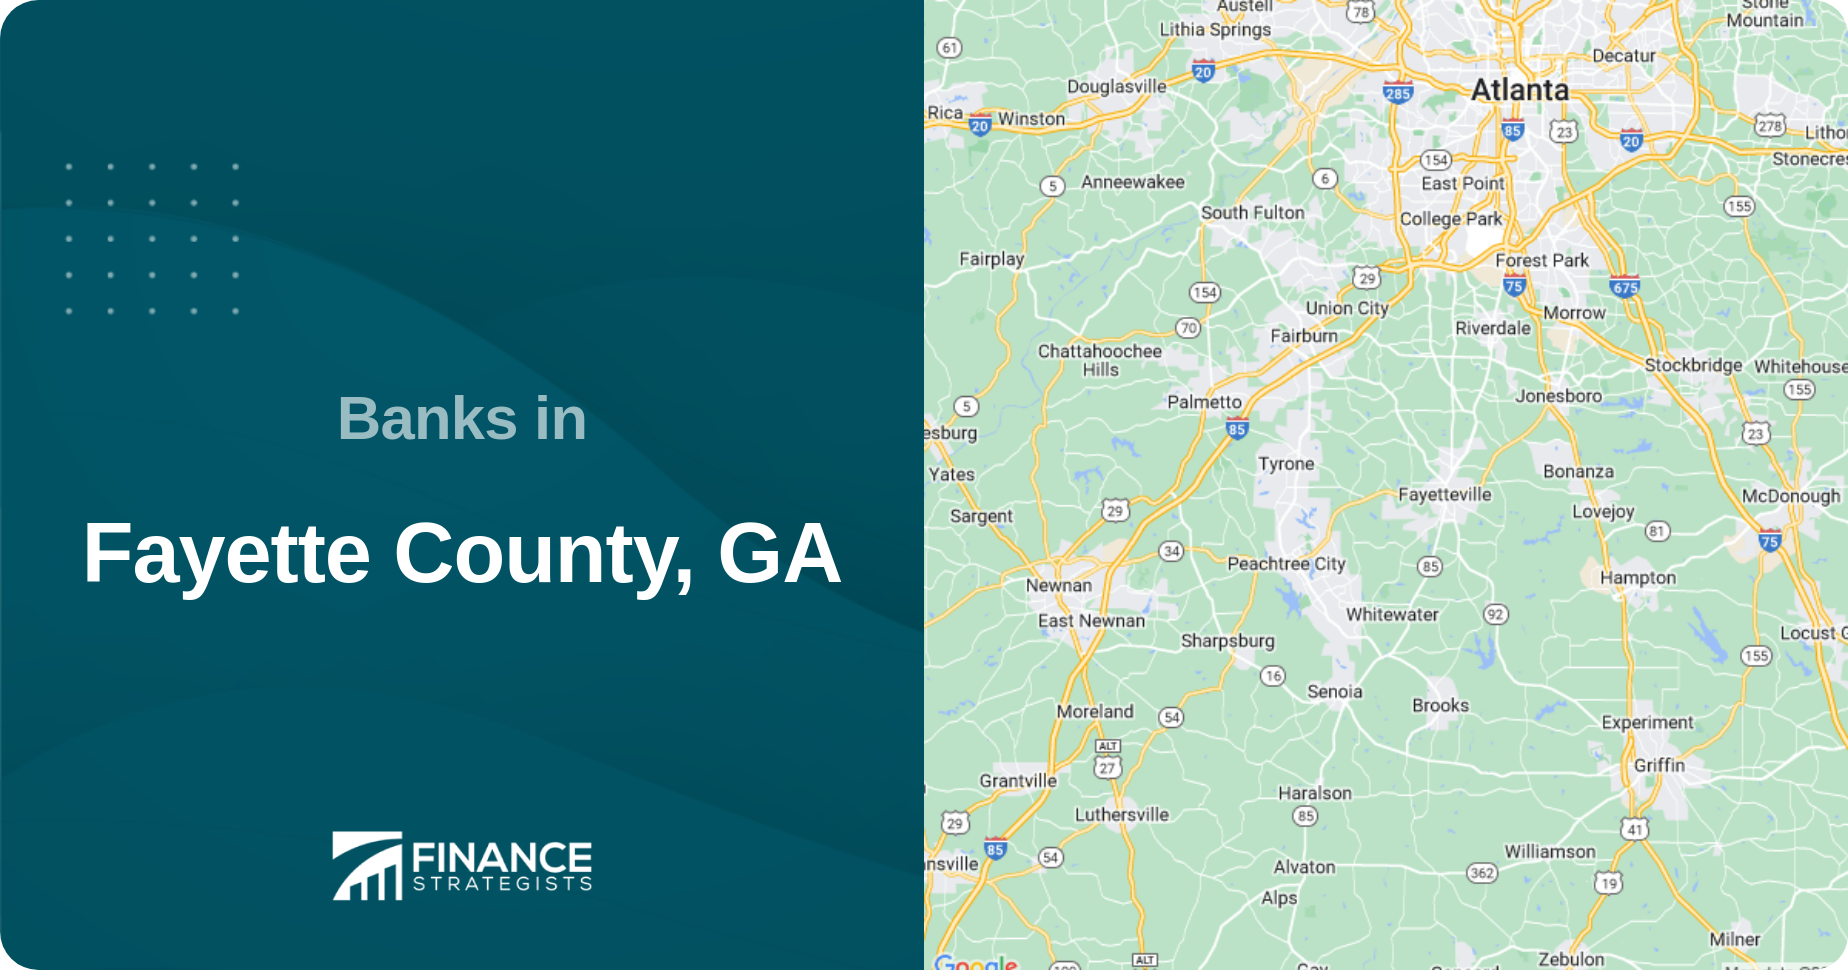 Banks in Fayette County, GA